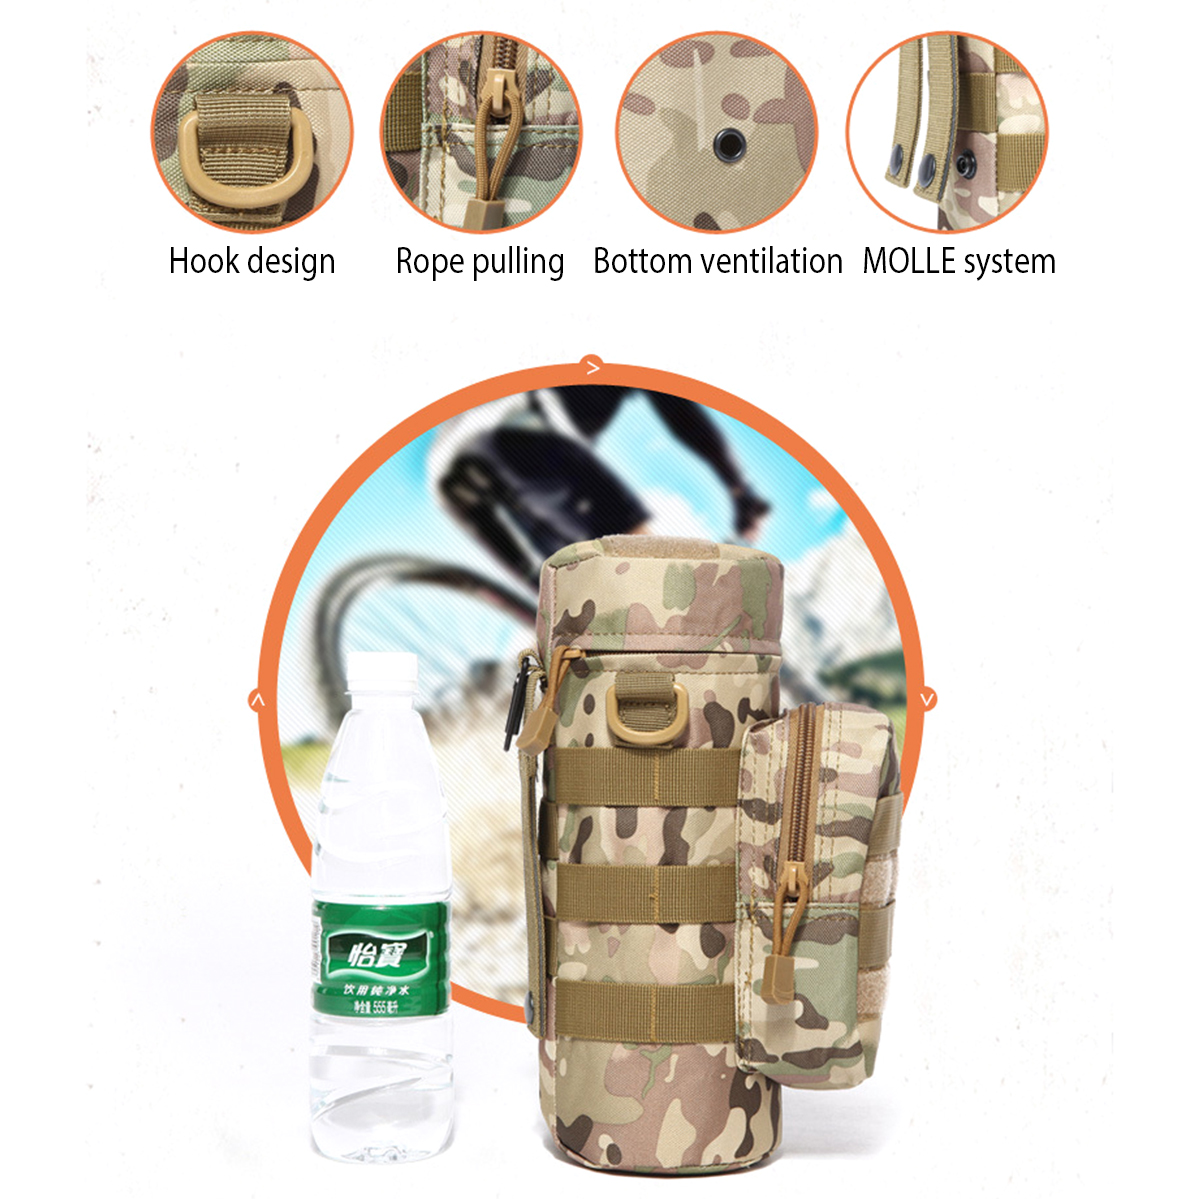 Multifunctional-Water-Bottle-Bag-Outdoor-Tactical-Bag-Sports-Hiking-Climbing-Package-Kettle-Bag-1484982-7